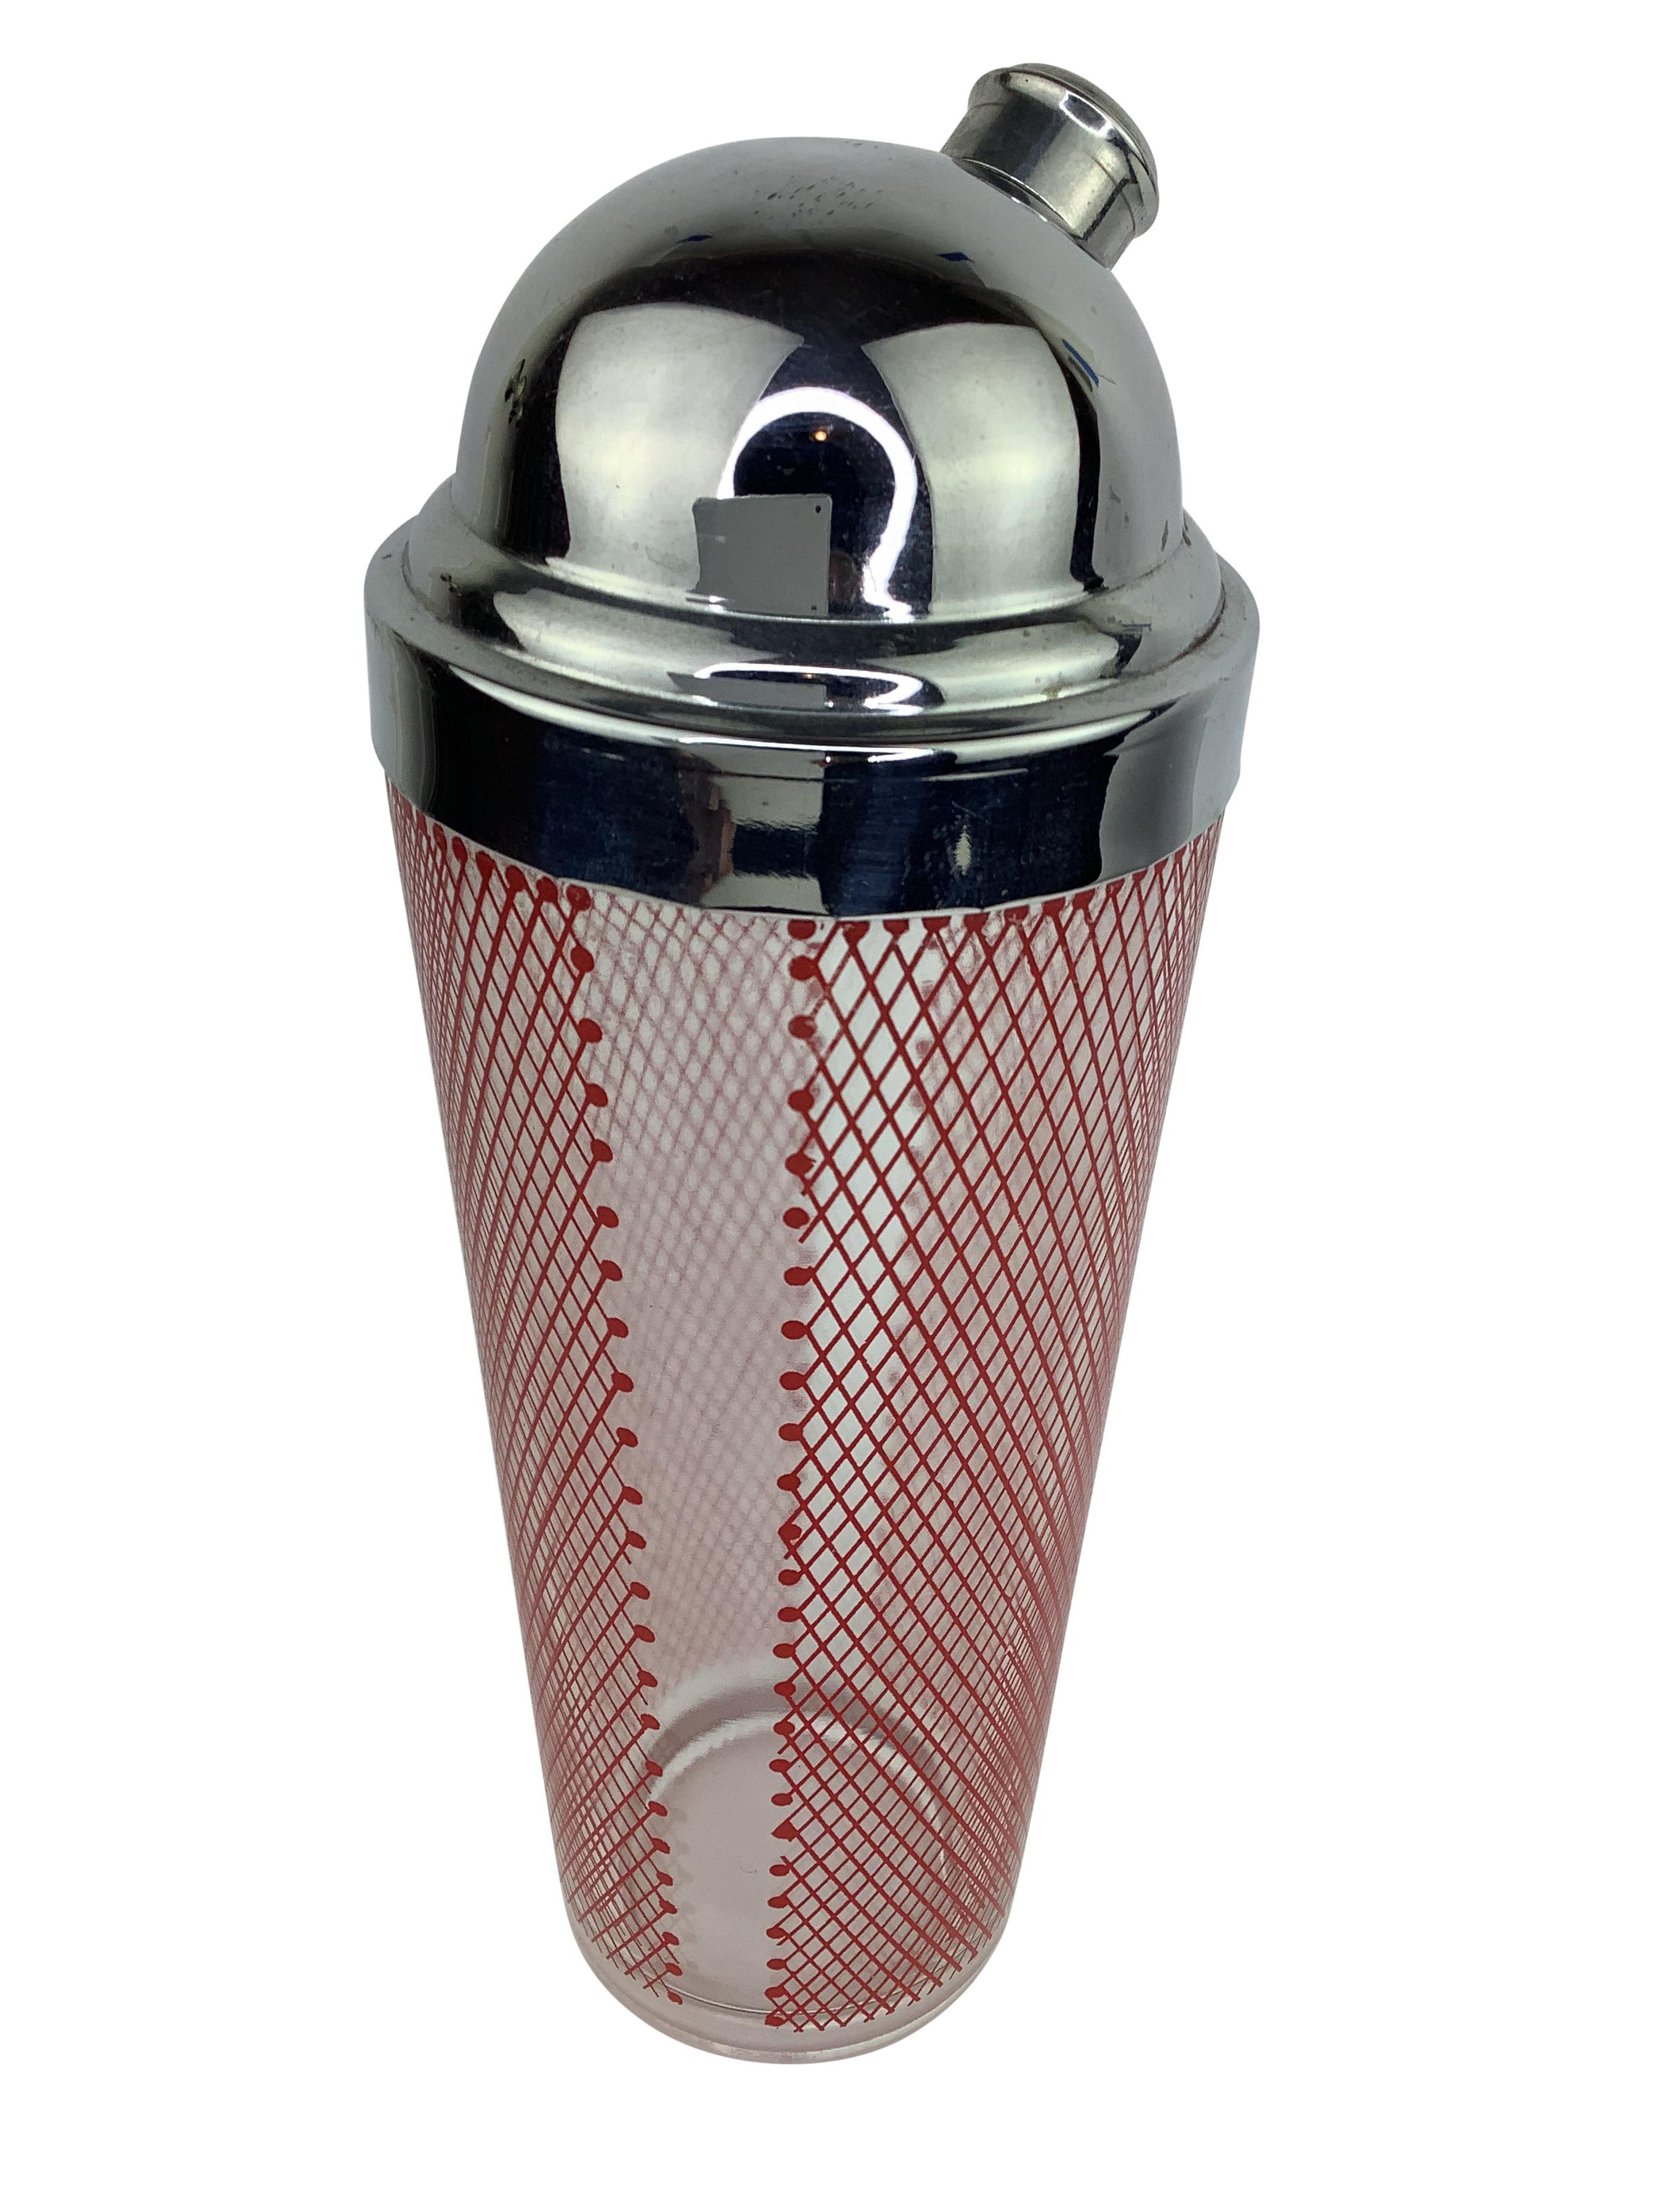 Vintage Art Deco period cocktail shaker decorated in a red criss-cross pattern with dome top chrome cover.